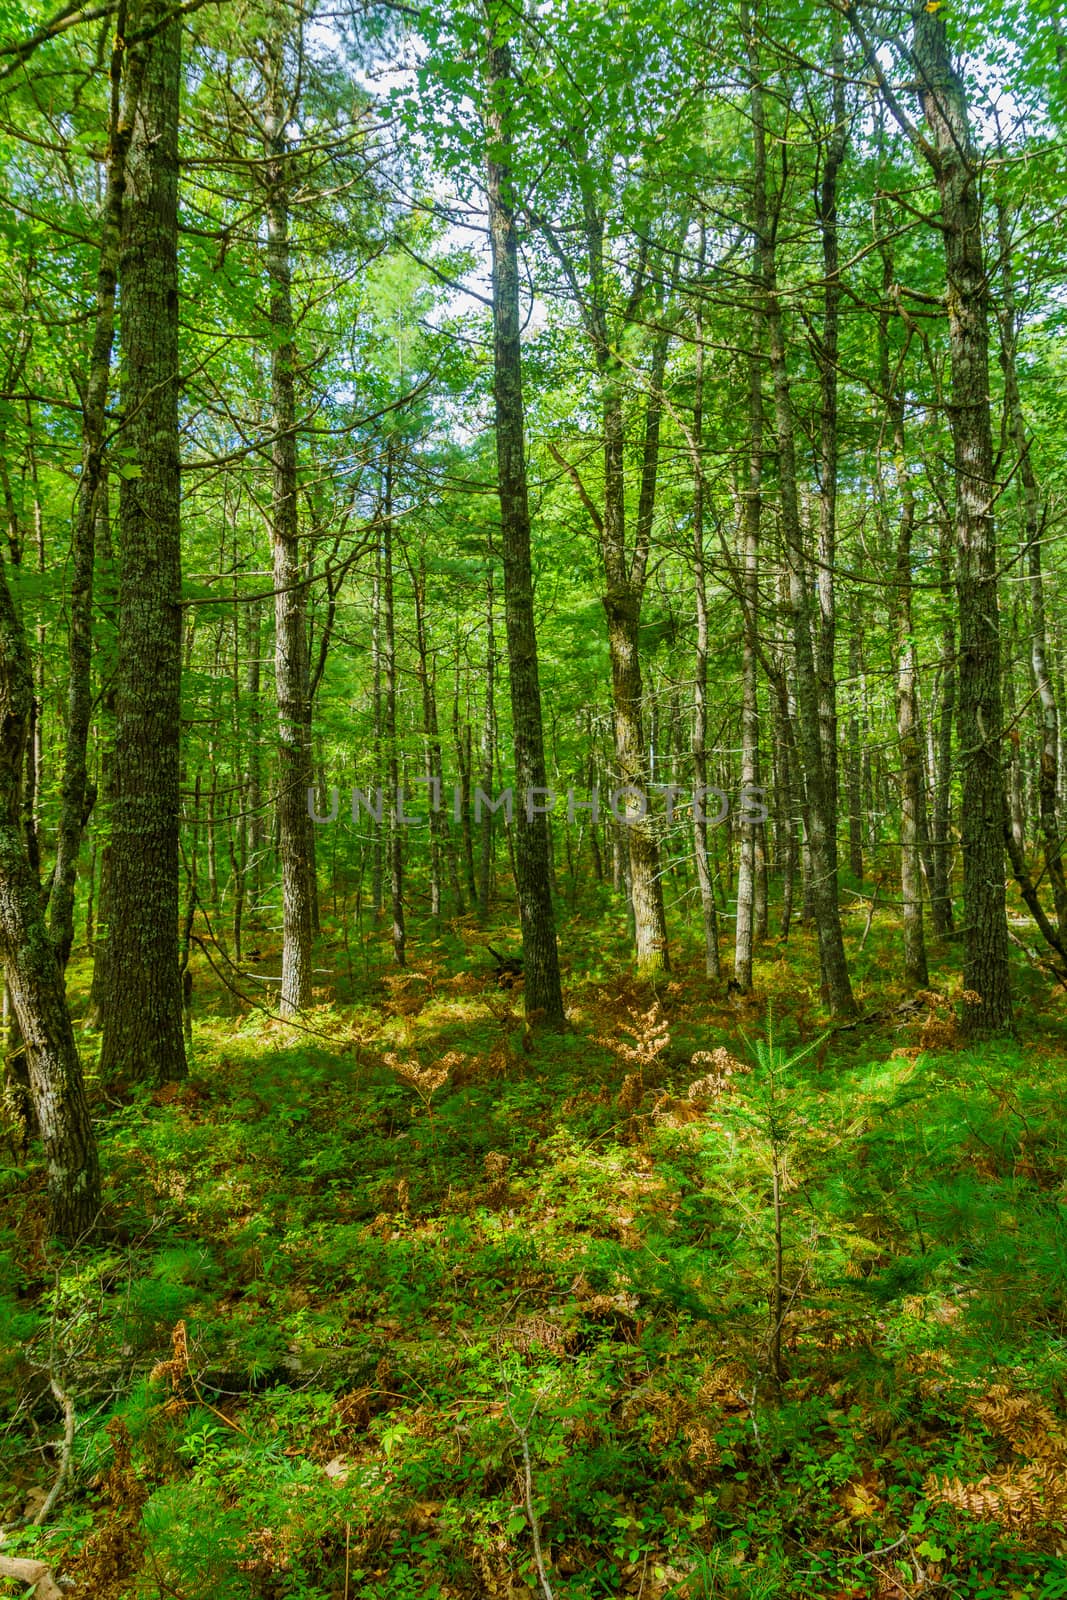 View of trees and forest, in Kejimkujik National Park, Nova Scotia, Canada